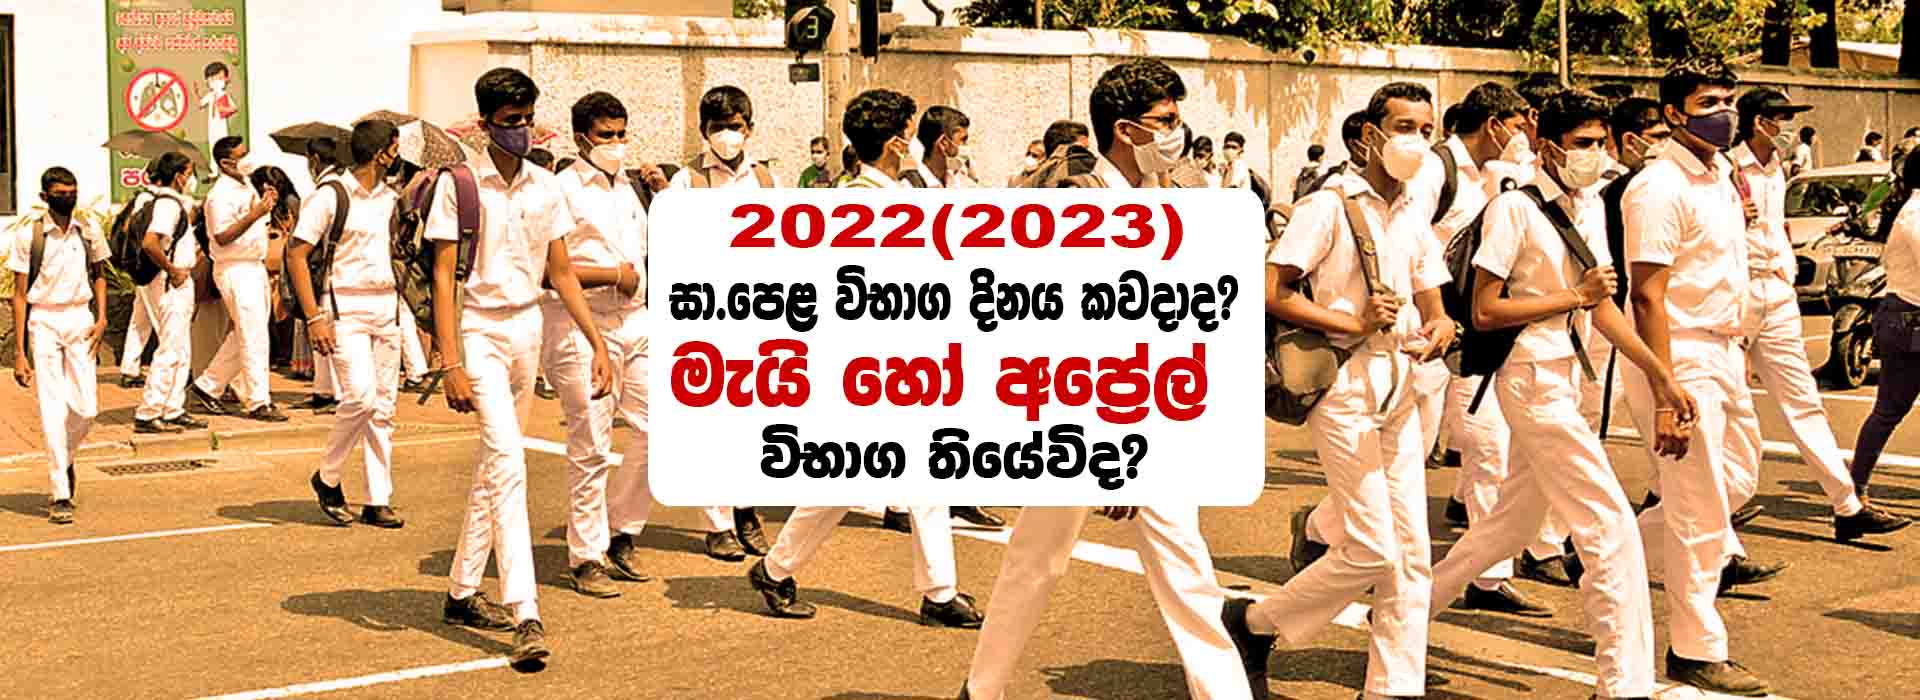 When is the 2022/2023 O/L Exam Date? When will start the GCE O/L 2023